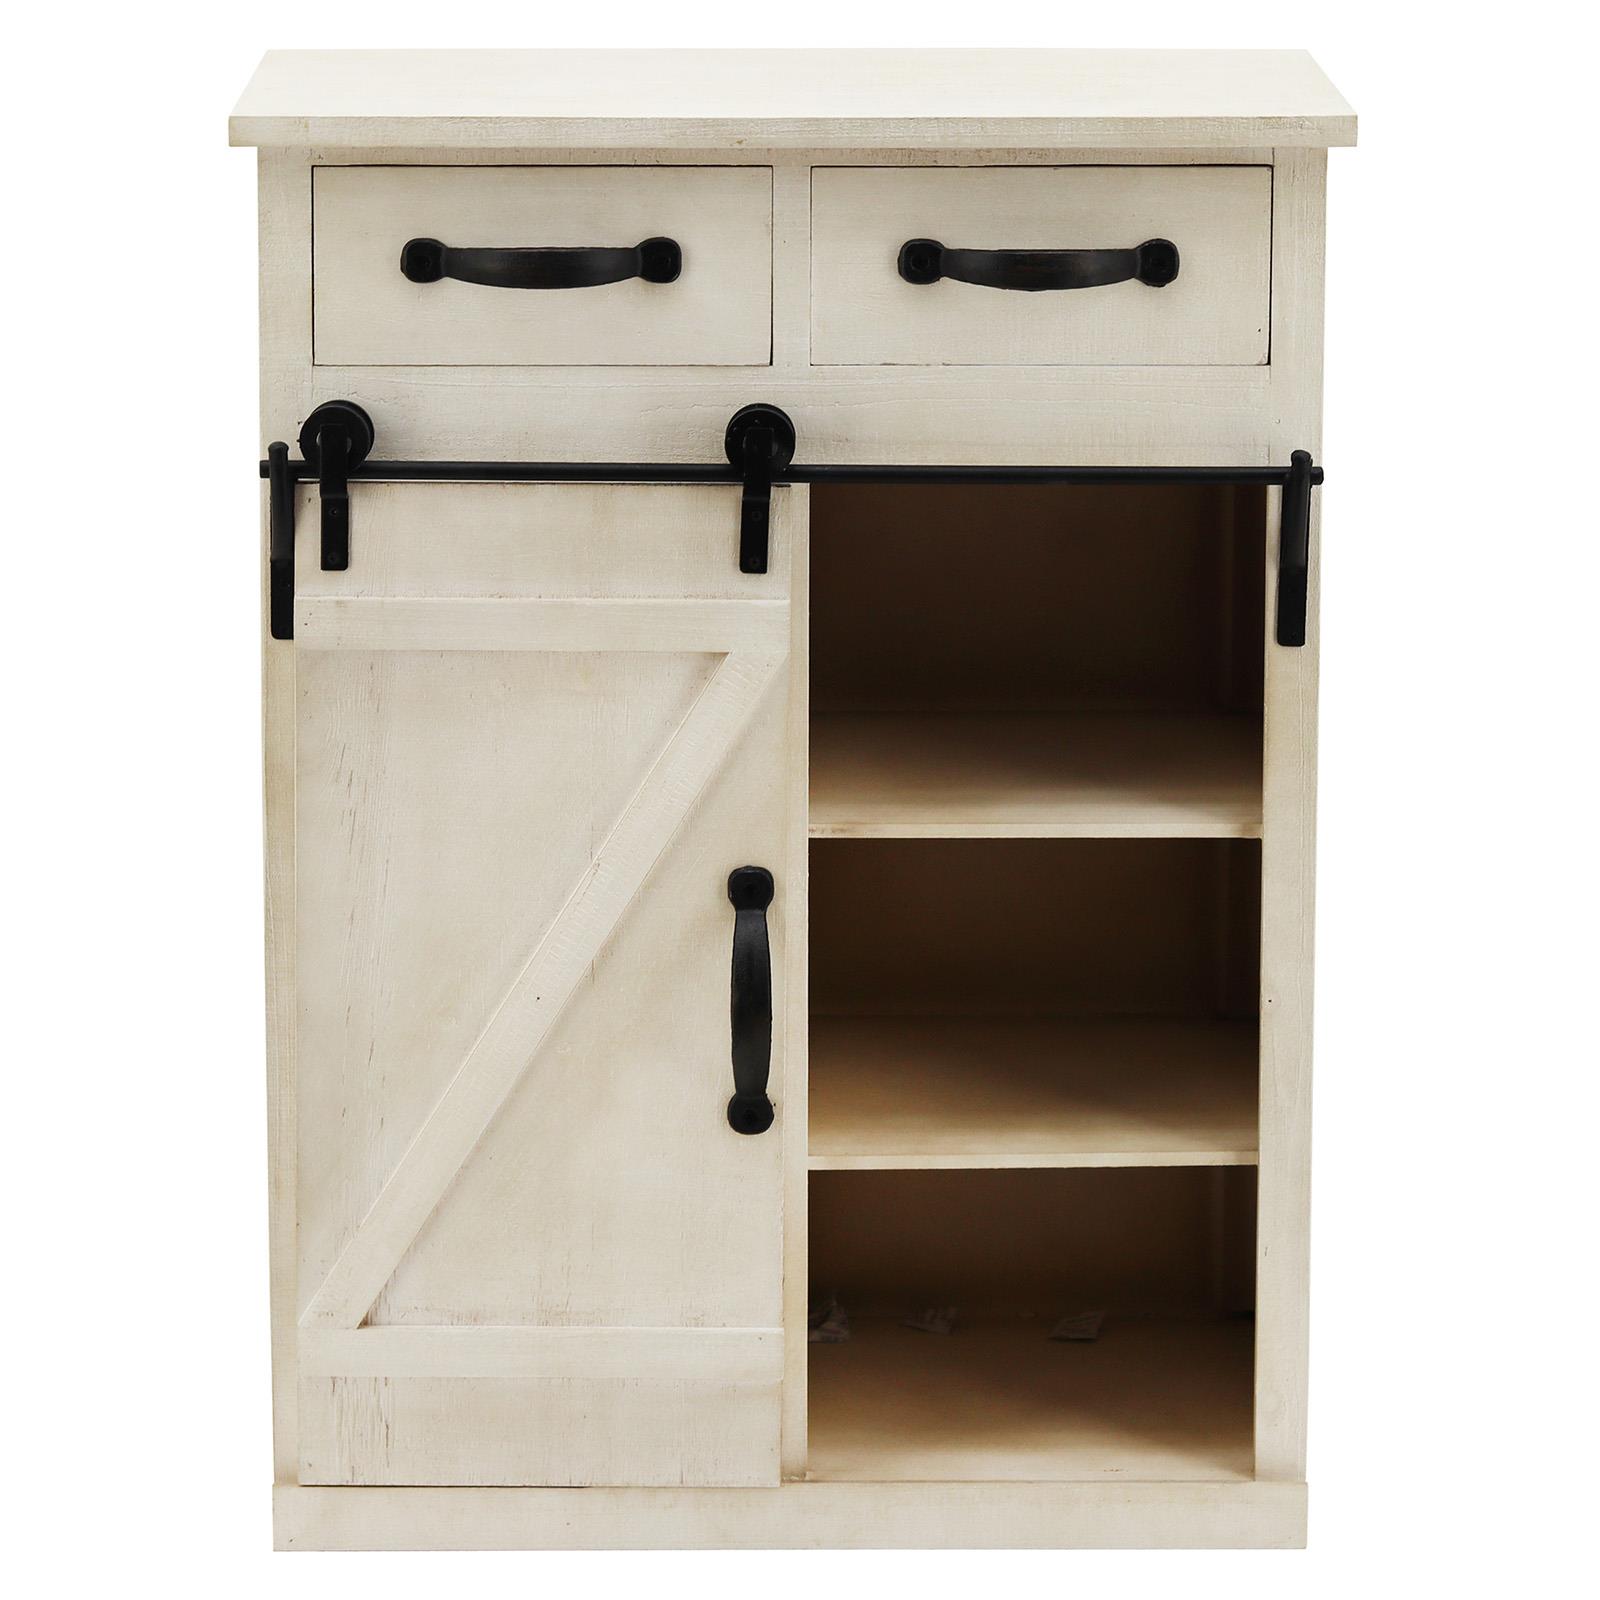 Zimtown Wood Accent Chest Sideboard Cabinet Entryway Table Retro Style with Farmhouse Single Barn Door, 2 Drawers White - image 5 of 10